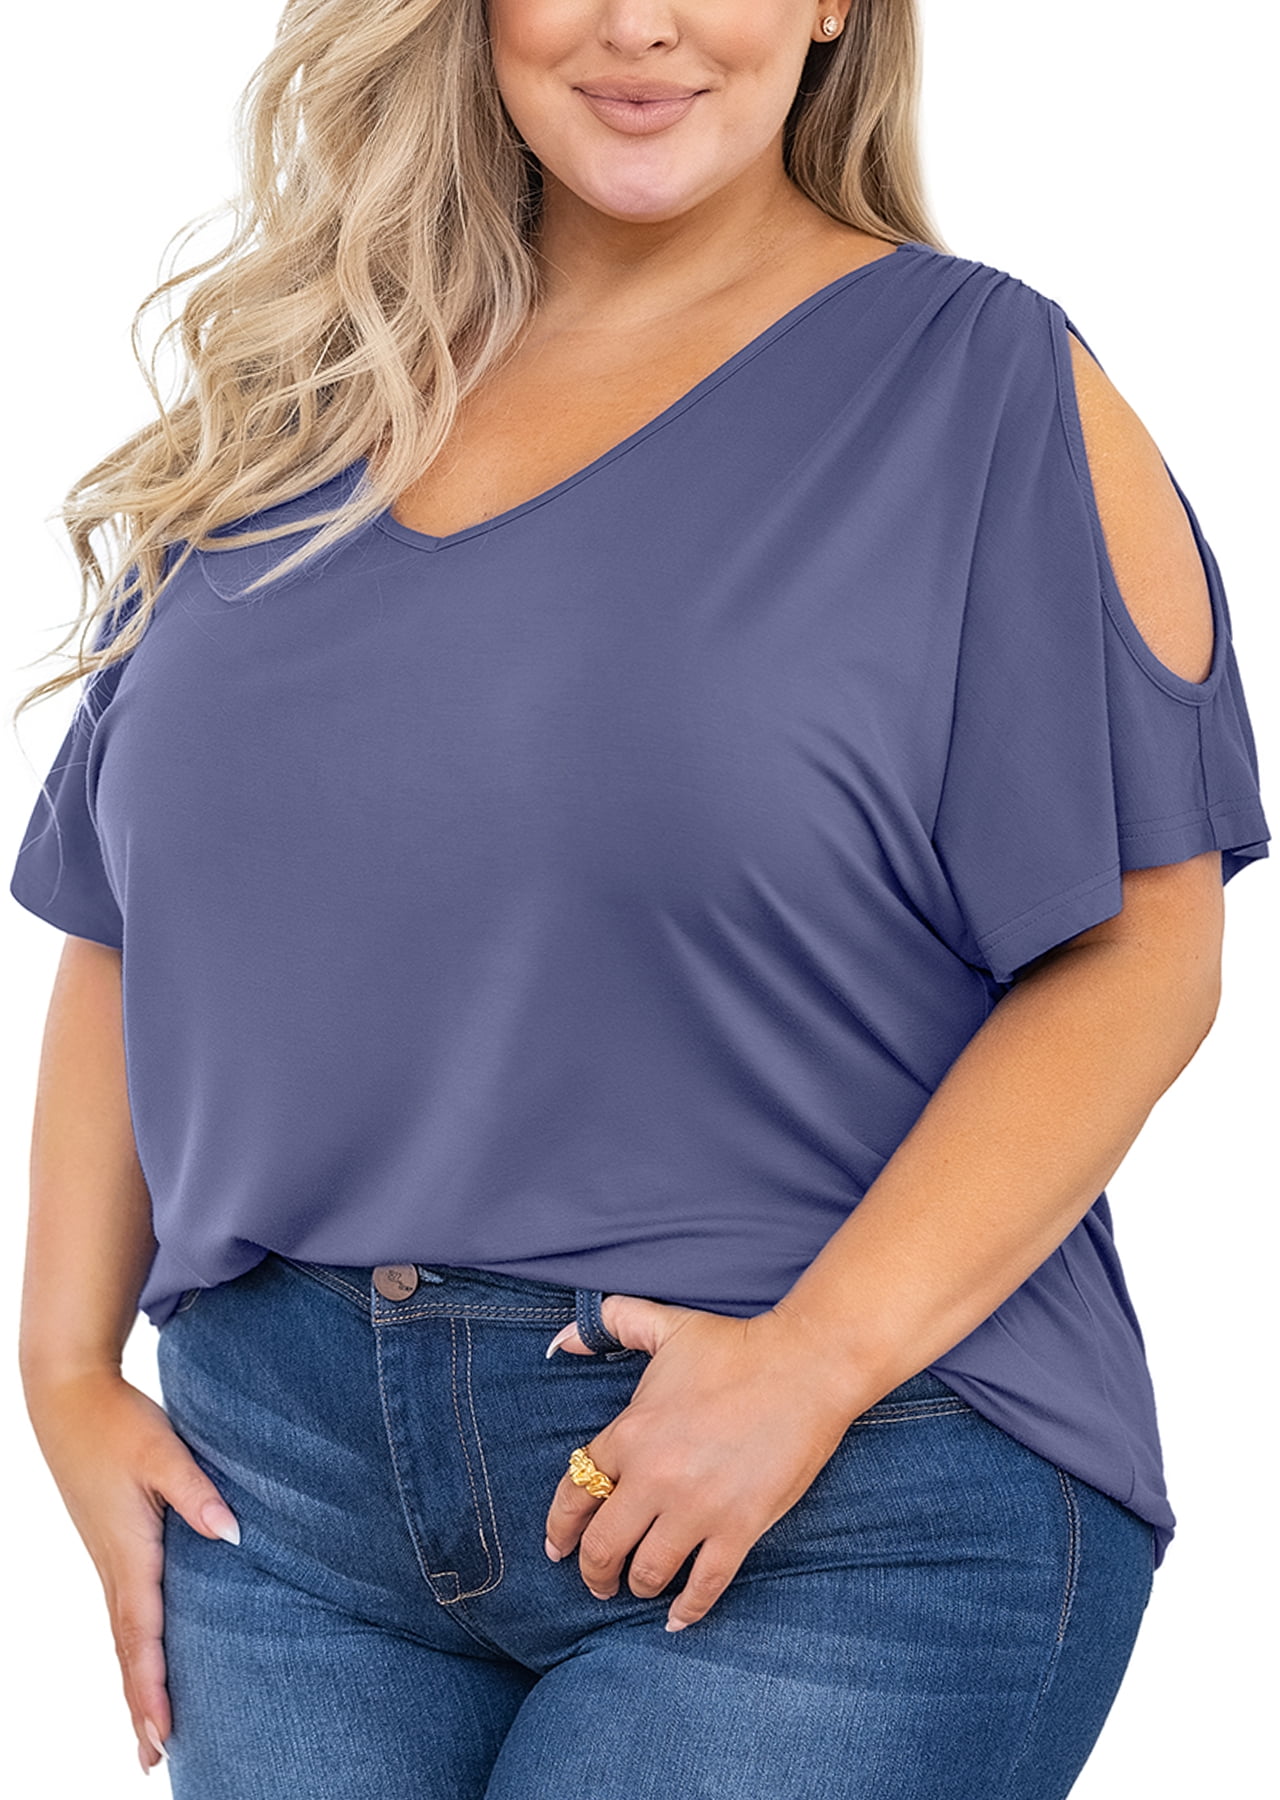 SHOWMALL Plus Size Tops for Women Cold Shoulder Clothes Gray Blue 3X Blouse  Short Sleeve Clothing V Neck Tunic Summer Shirts 